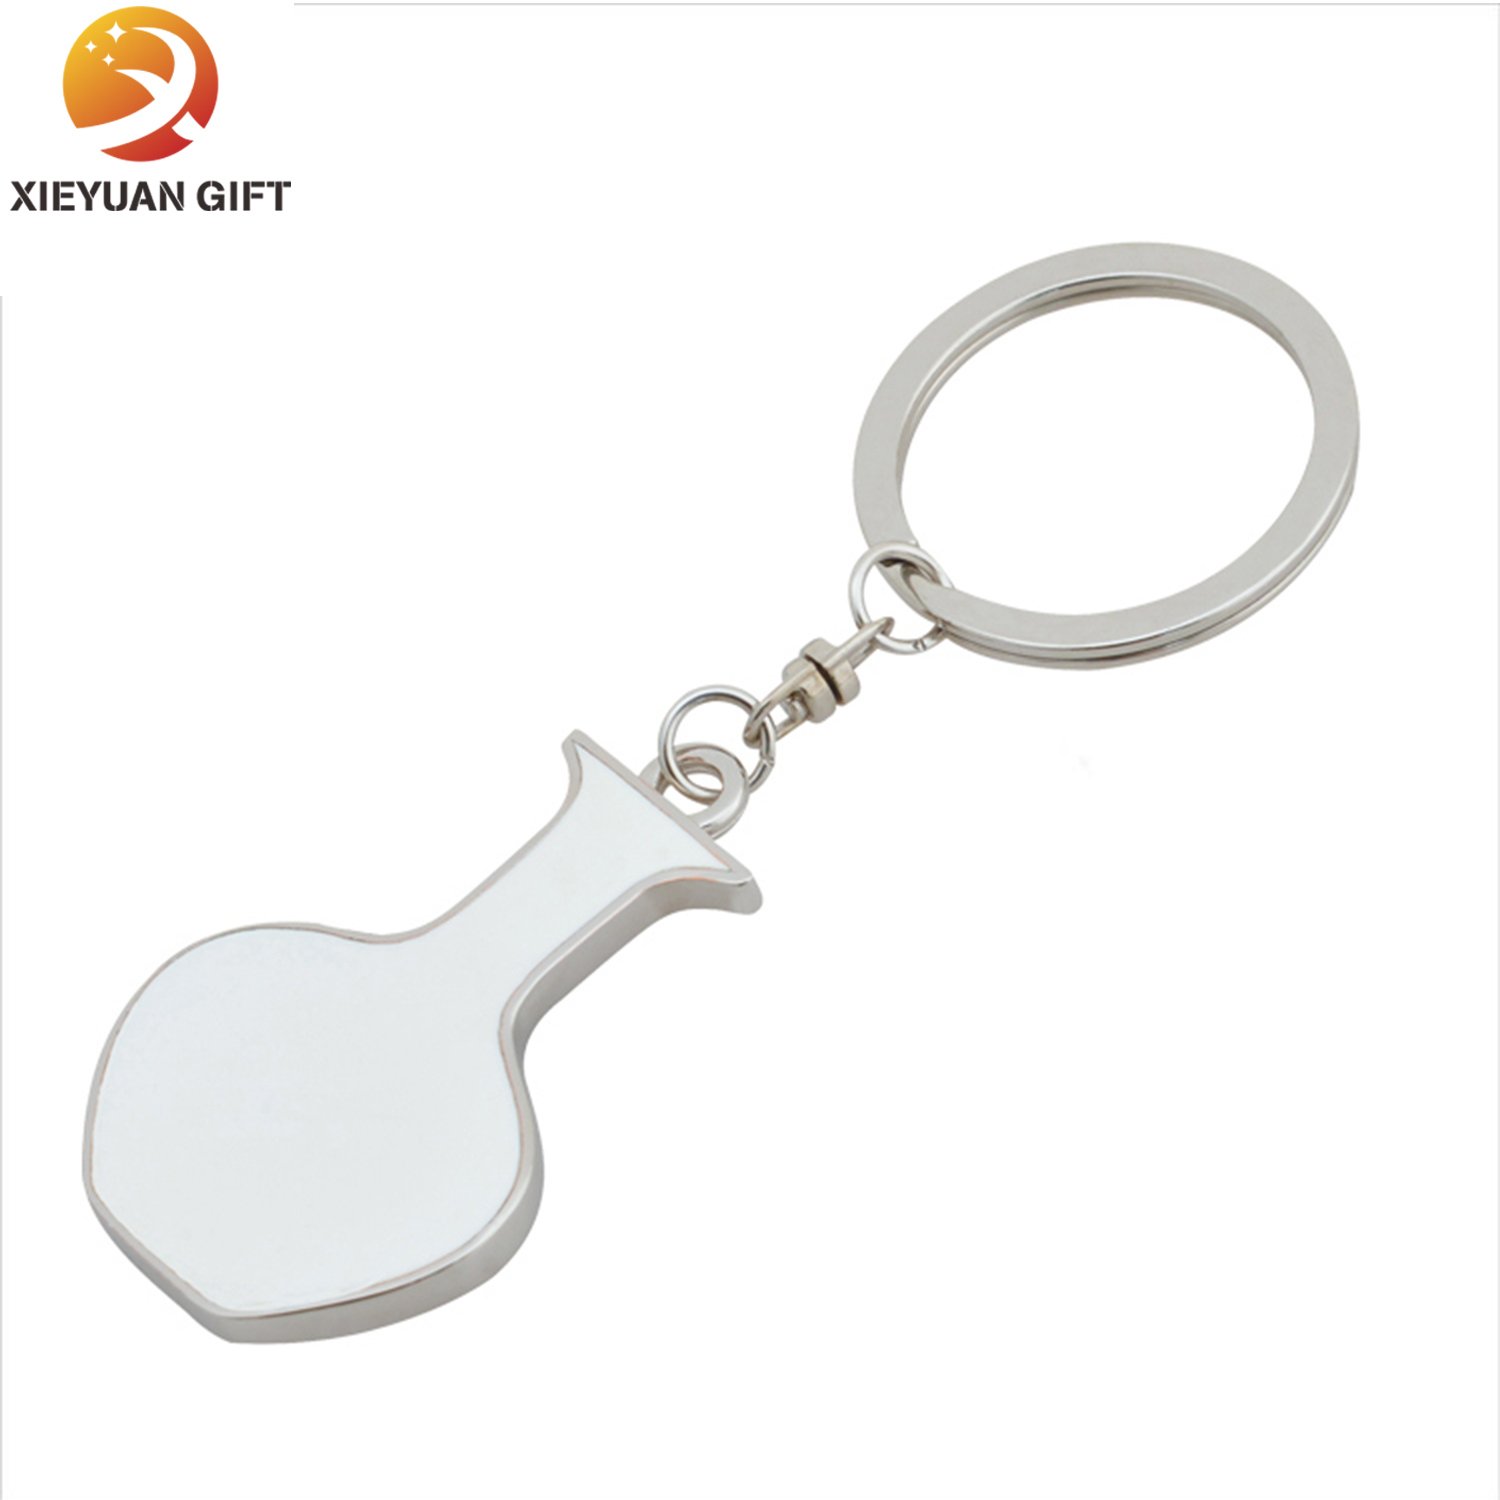 Plane Shape 3D Metal Key Holder with Silver Plating (XY-mxl91005)